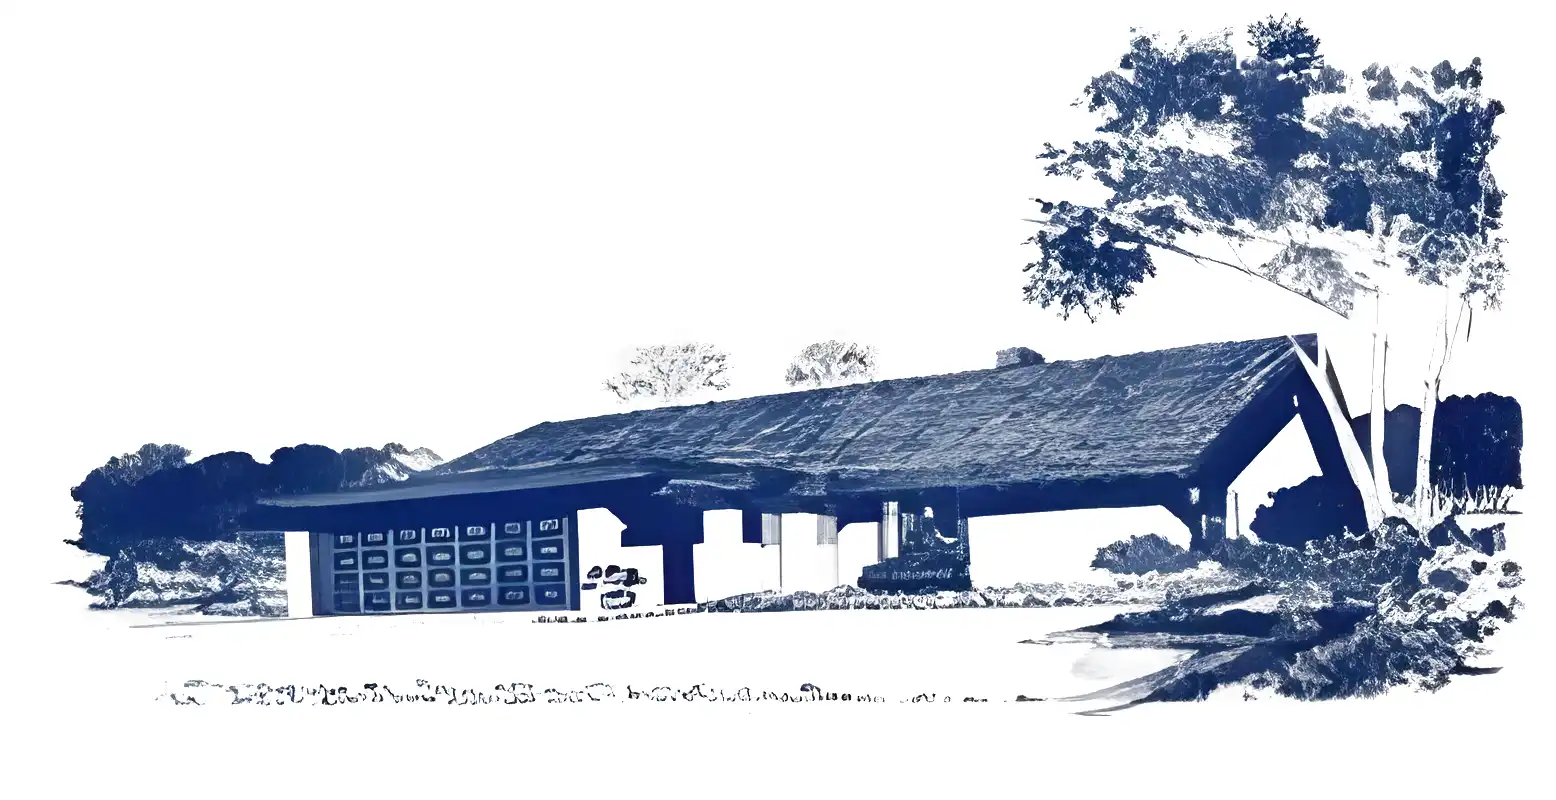 Monochrome rendering of 1960s ranch style house, variant combining gable roof and flat roofed garage.